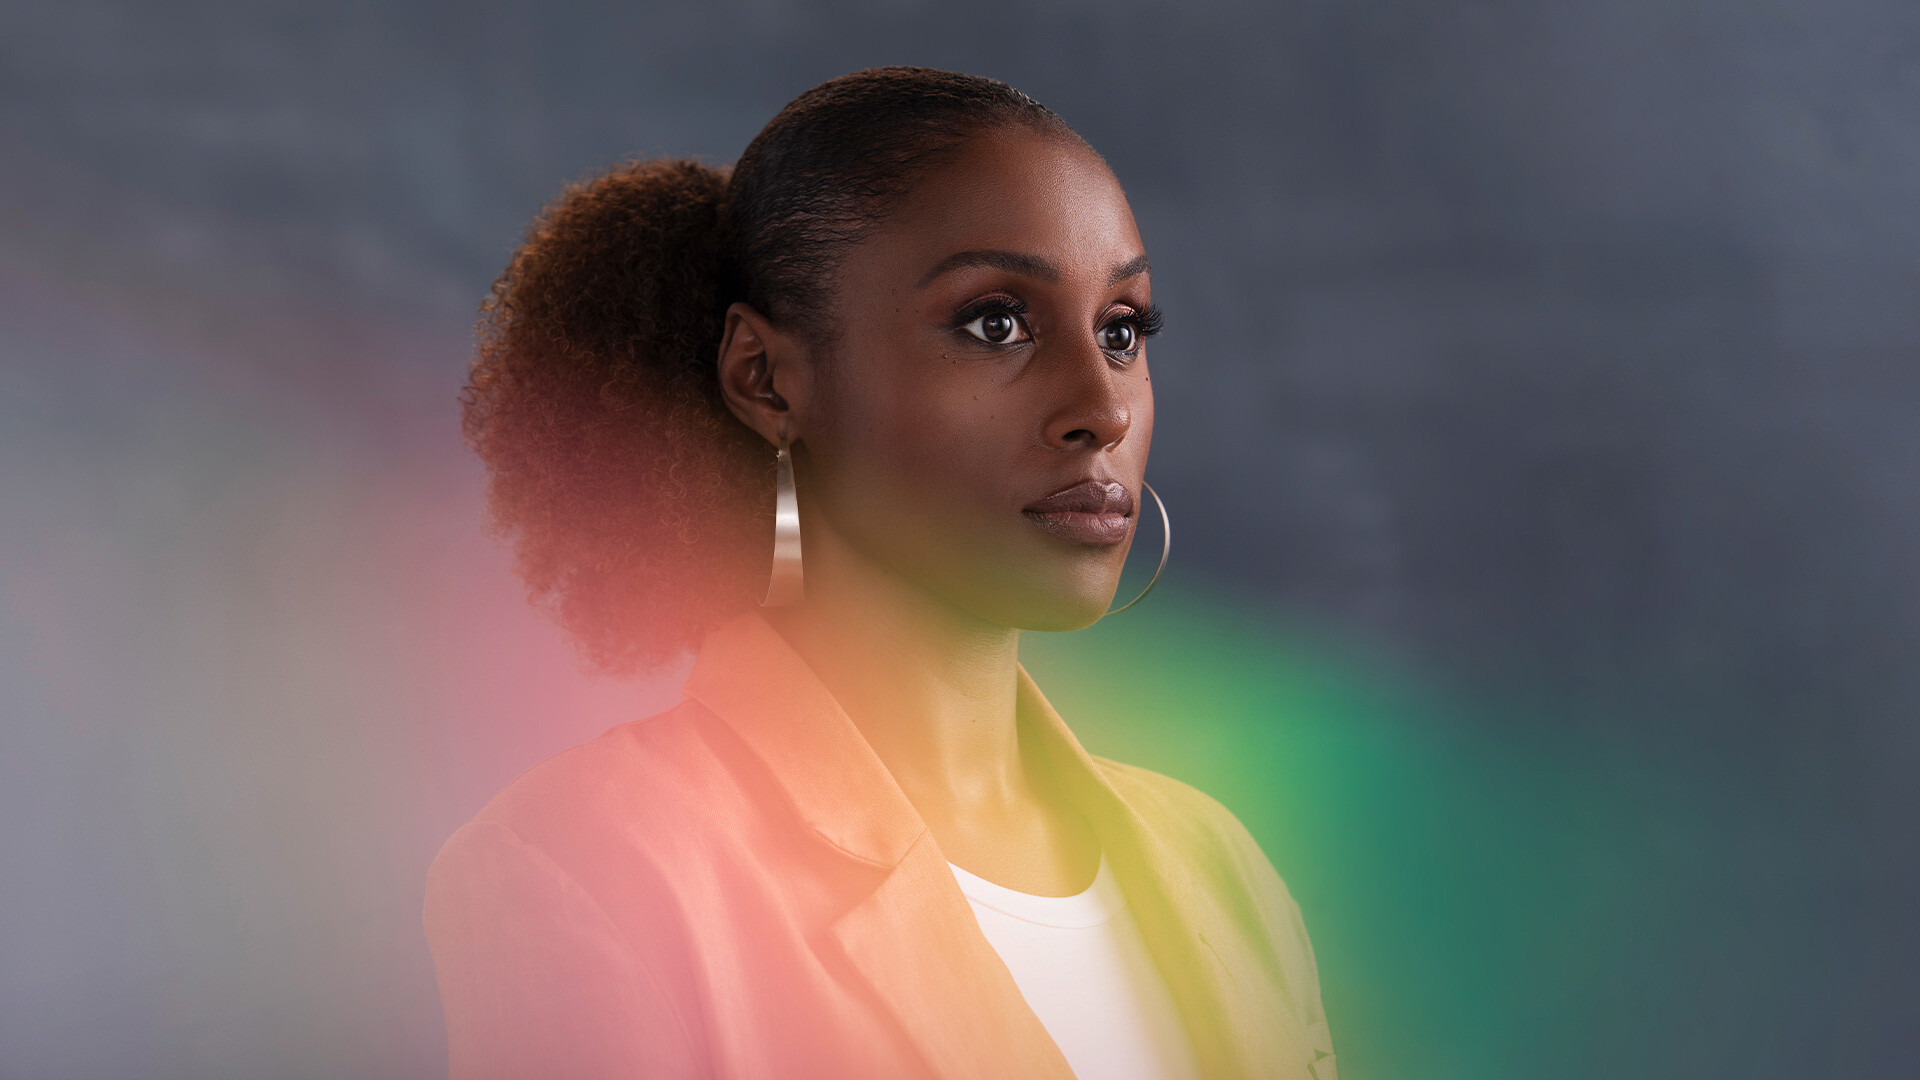 Issa Rae: Awkward Black Girl, An American actress, writer, producer, and comedian. 1920x1080 Full HD Background.